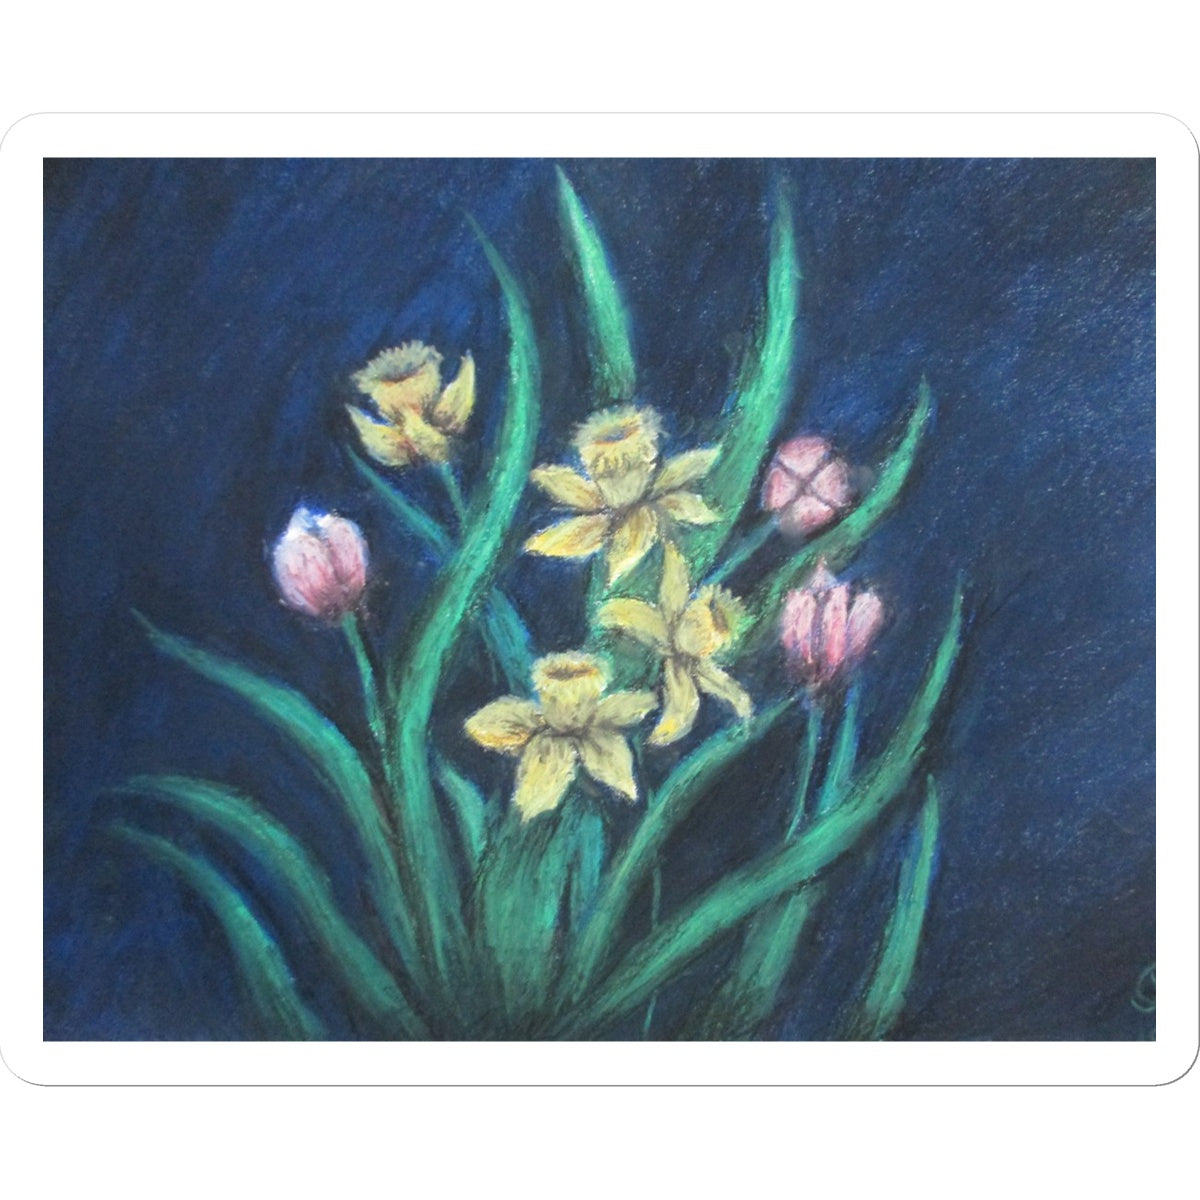 Poet and her Soul Speaking Paintings ~ prints, originals and more  Since creation is love To create is love So create to be above And then you will feel inlove  Original Artwork and Poetry of Artist Jen Shearer  This is a original soft pastel painting printed on product.